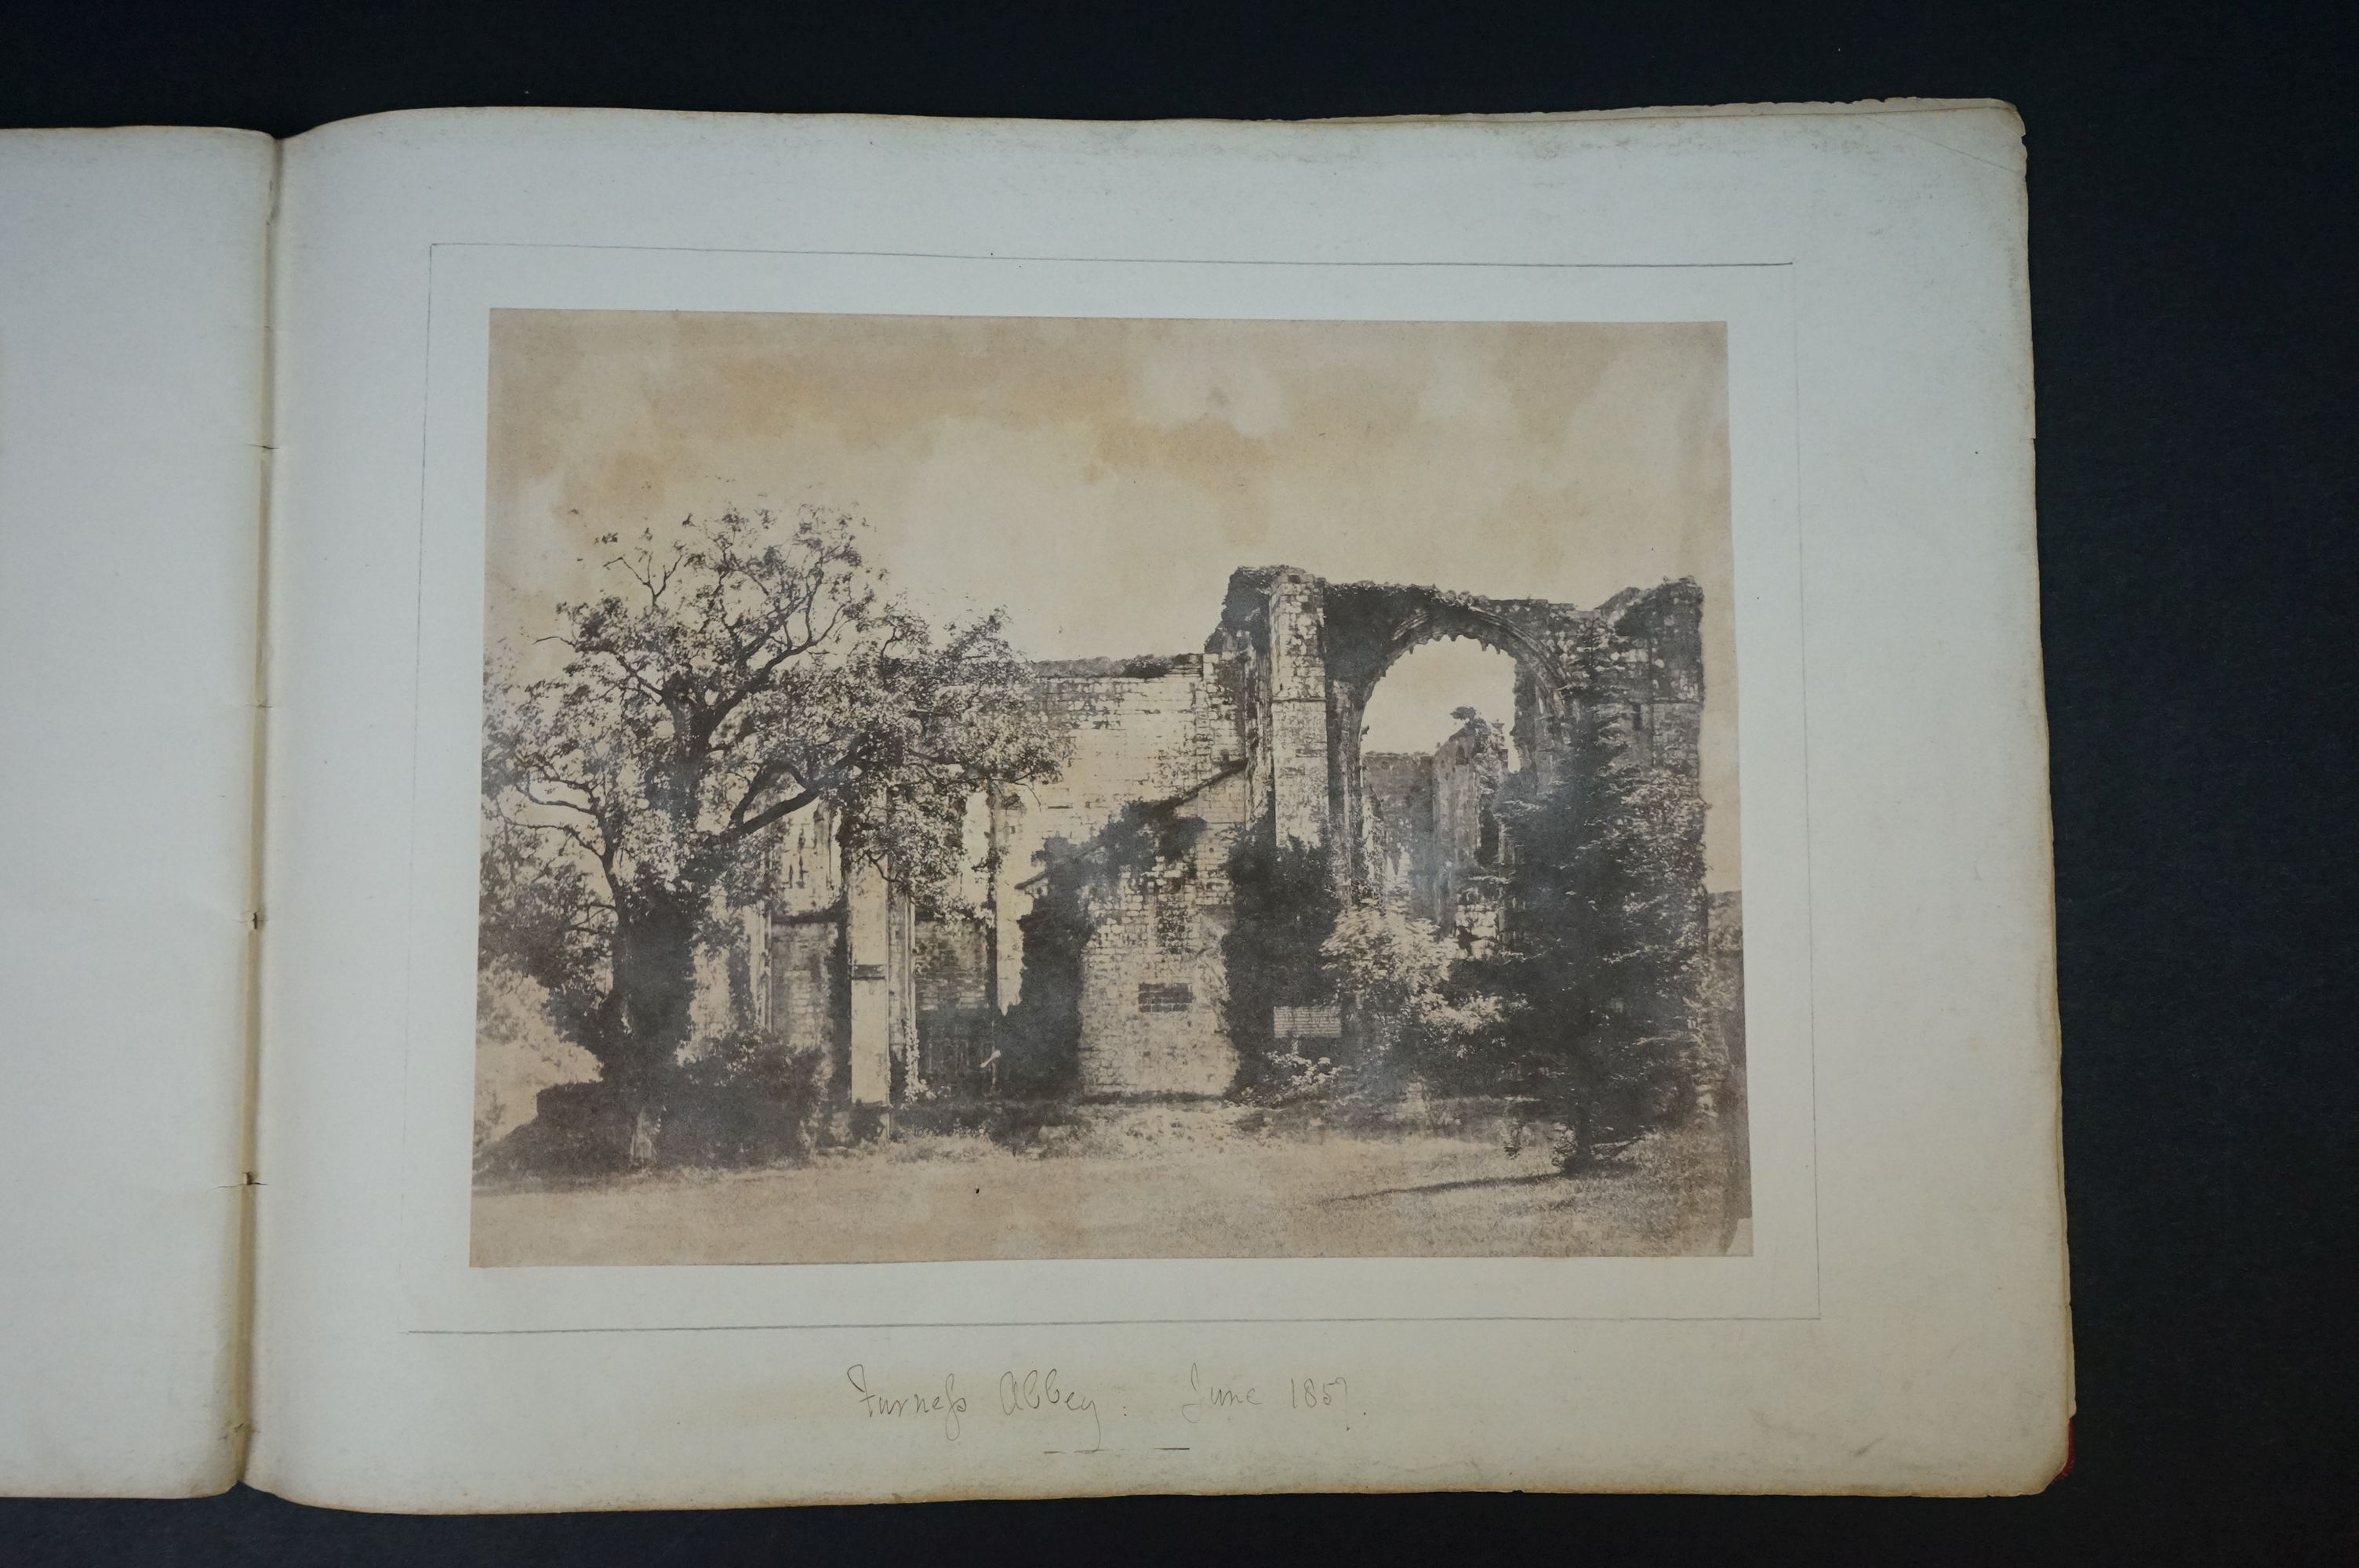 Photographic Illustrations by J.W.G. Gutch, M.R.C.S.L. Division No. 13. Deanery of Winchcombe. - Image 24 of 26